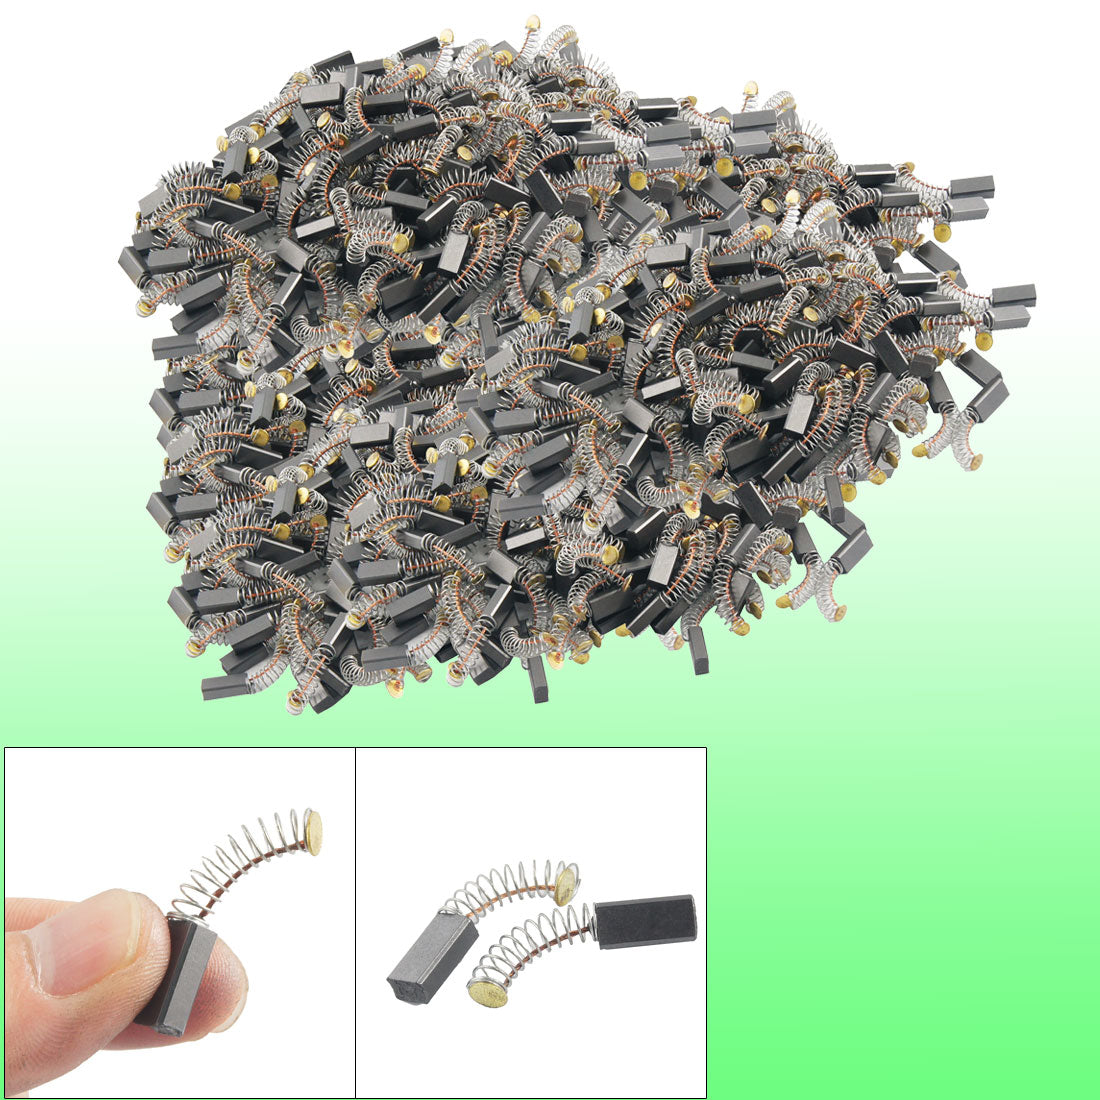 uxcell Uxcell 200 Pcs 4mm x 6mm x 12mm Electric Motor Carbon Brushes